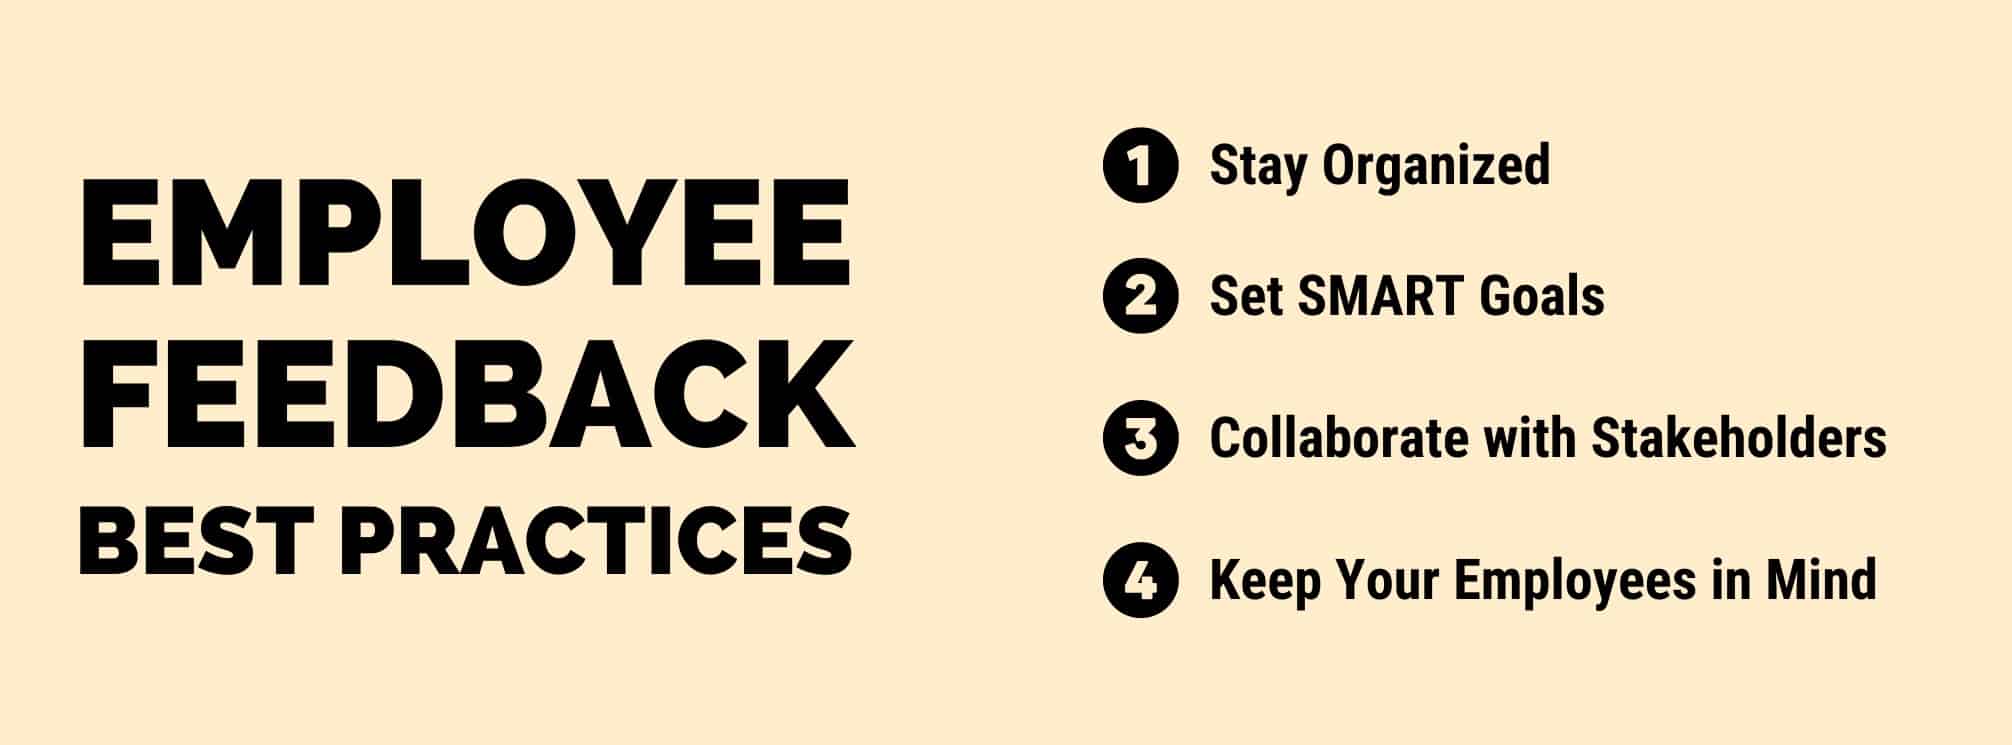 graphic that says: employee feedback best practices, 1. stay organized, 2. set SMART goals, 3. collaborate with stakeholders, 4. keep your employees in mind